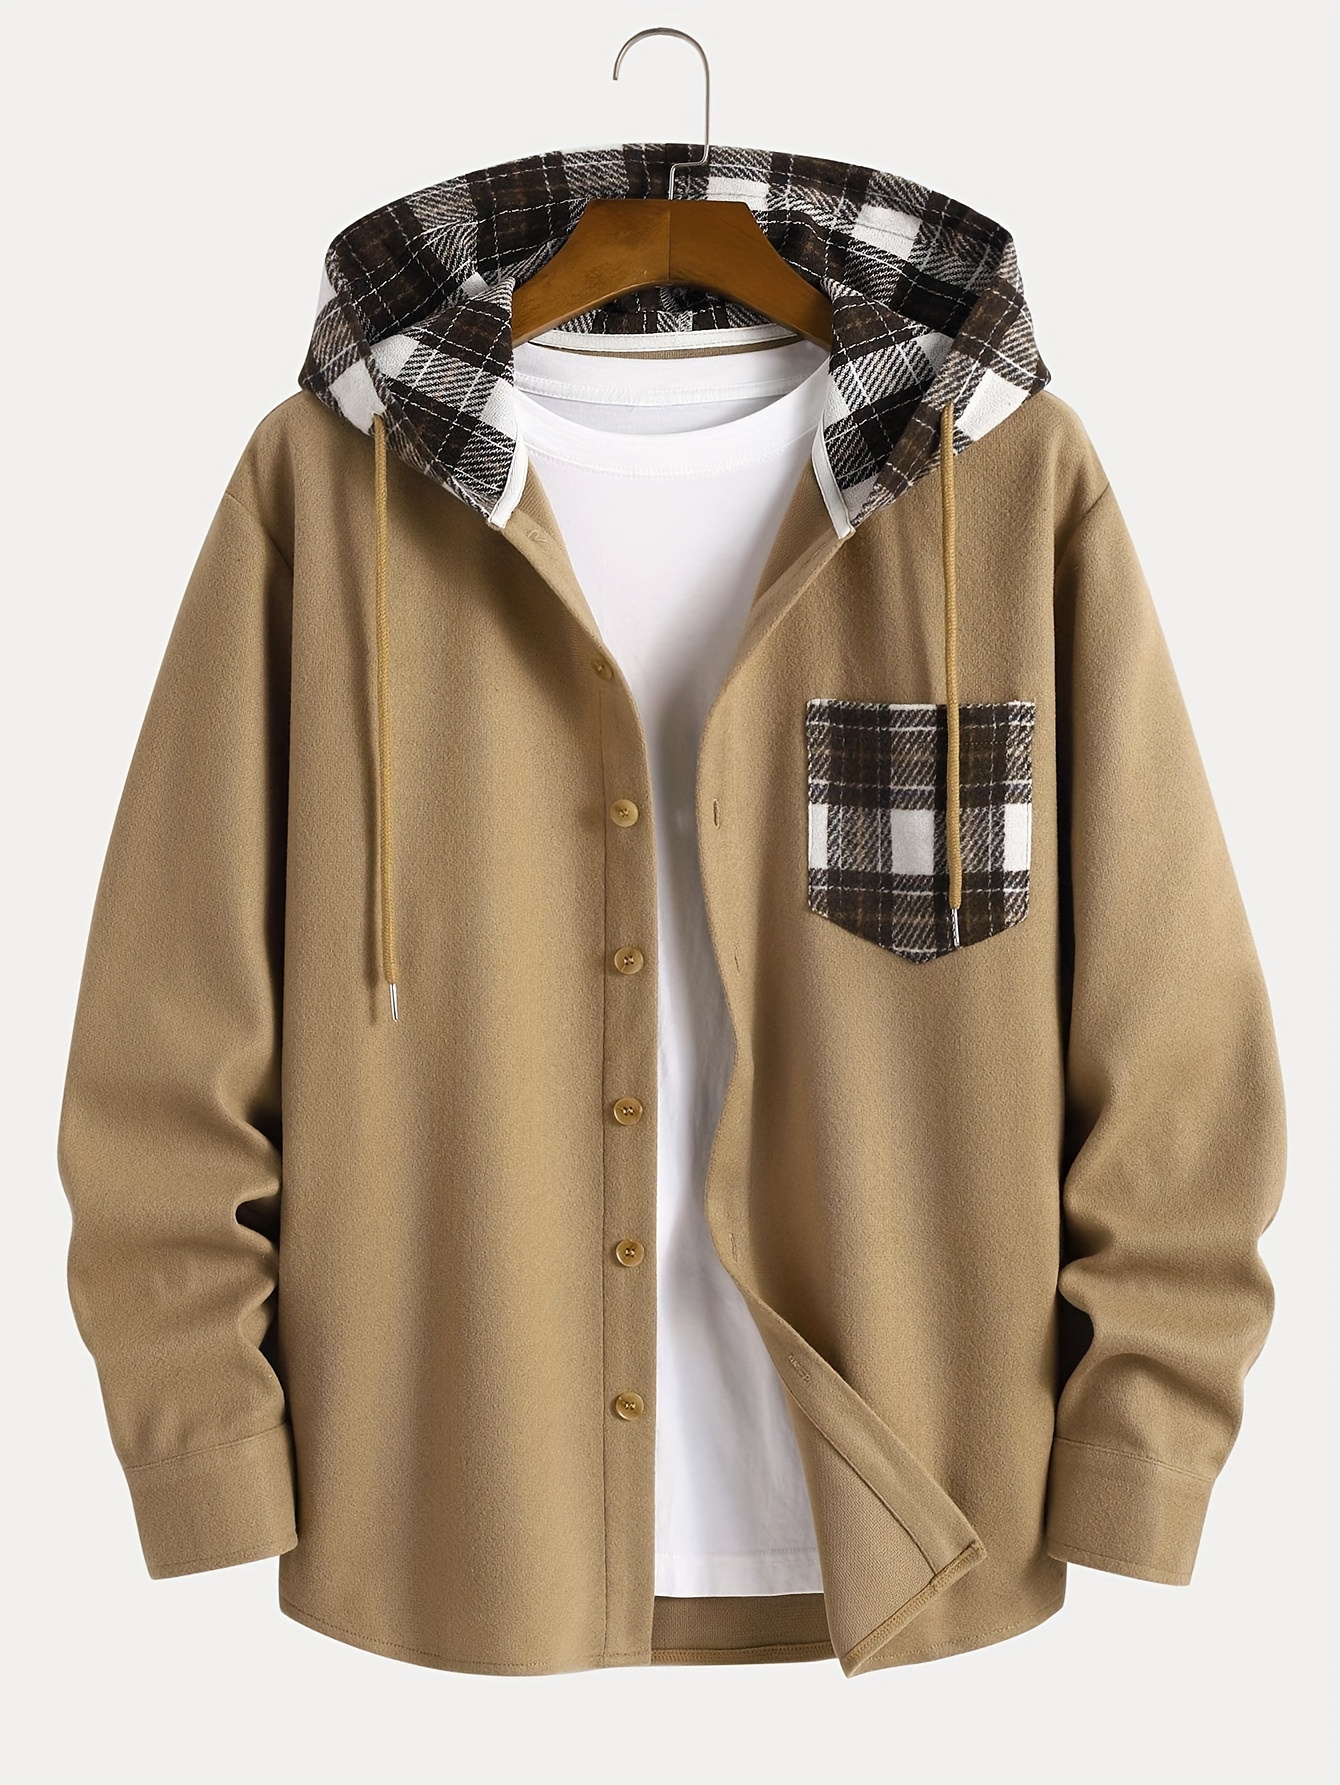 Hoodies for Men Men's Plaid Hooded Shirts Casual Kuwait